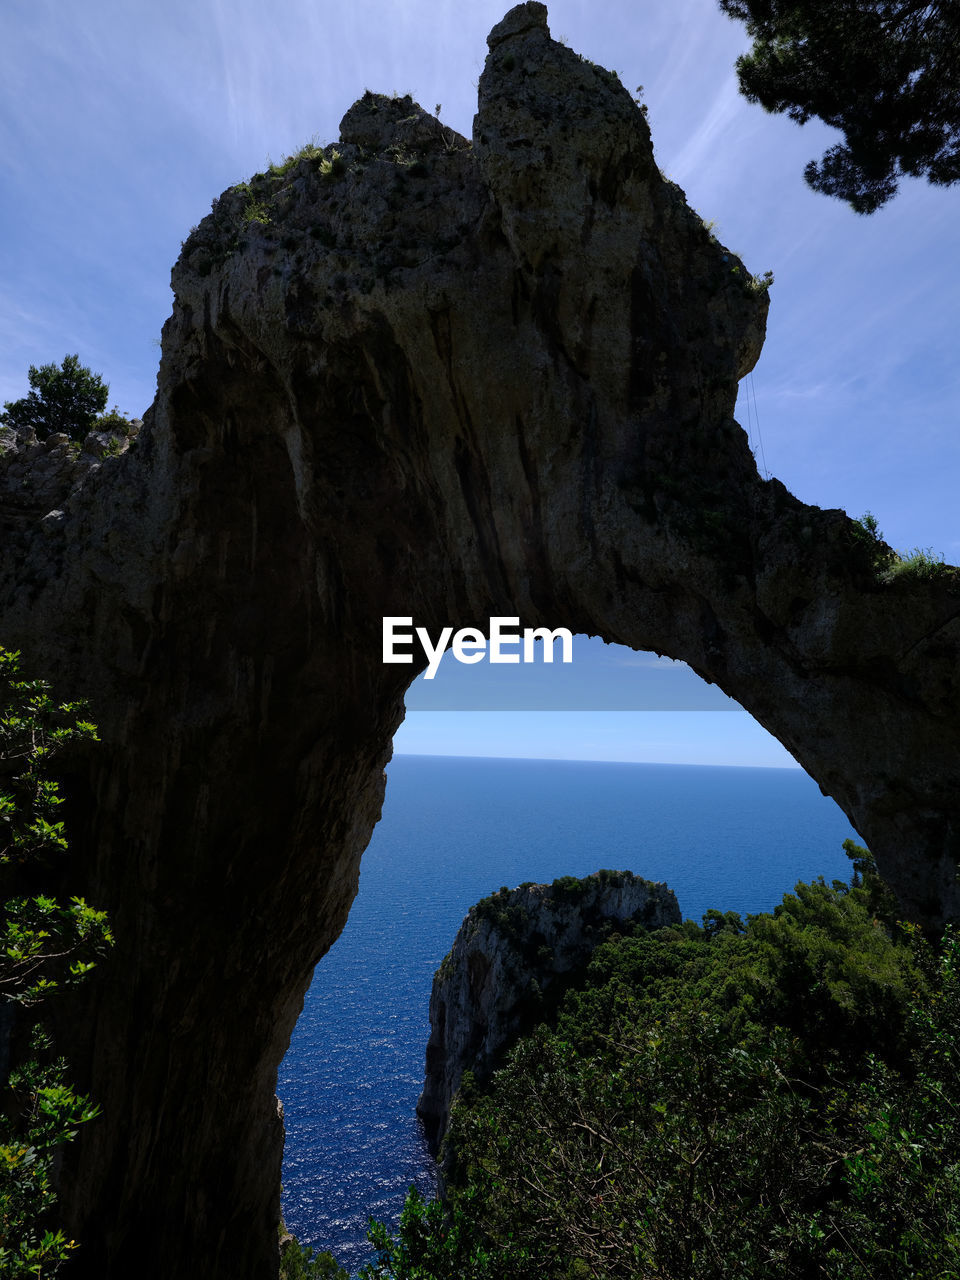 rock, sky, arch, nature, natural arch, rock formation, beauty in nature, land, scenics - nature, plant, tree, water, travel destinations, environment, landscape, tranquility, no people, cloud, architecture, travel, outdoor pursuit, non-urban scene, sea, cave, blue, geology, outdoors, coast, clear sky, nature reserve, idyllic, physical geography, forest, cliff, tourism, terrain, mountain, pinaceae, activity, tranquil scene, day, eroded, sunny, reflection, accidents and disasters, atmospheric mood, limestone, hole, coniferous tree, pine tree, animal wildlife, beach, silhouette, history, pine woodland, sunlight, formation